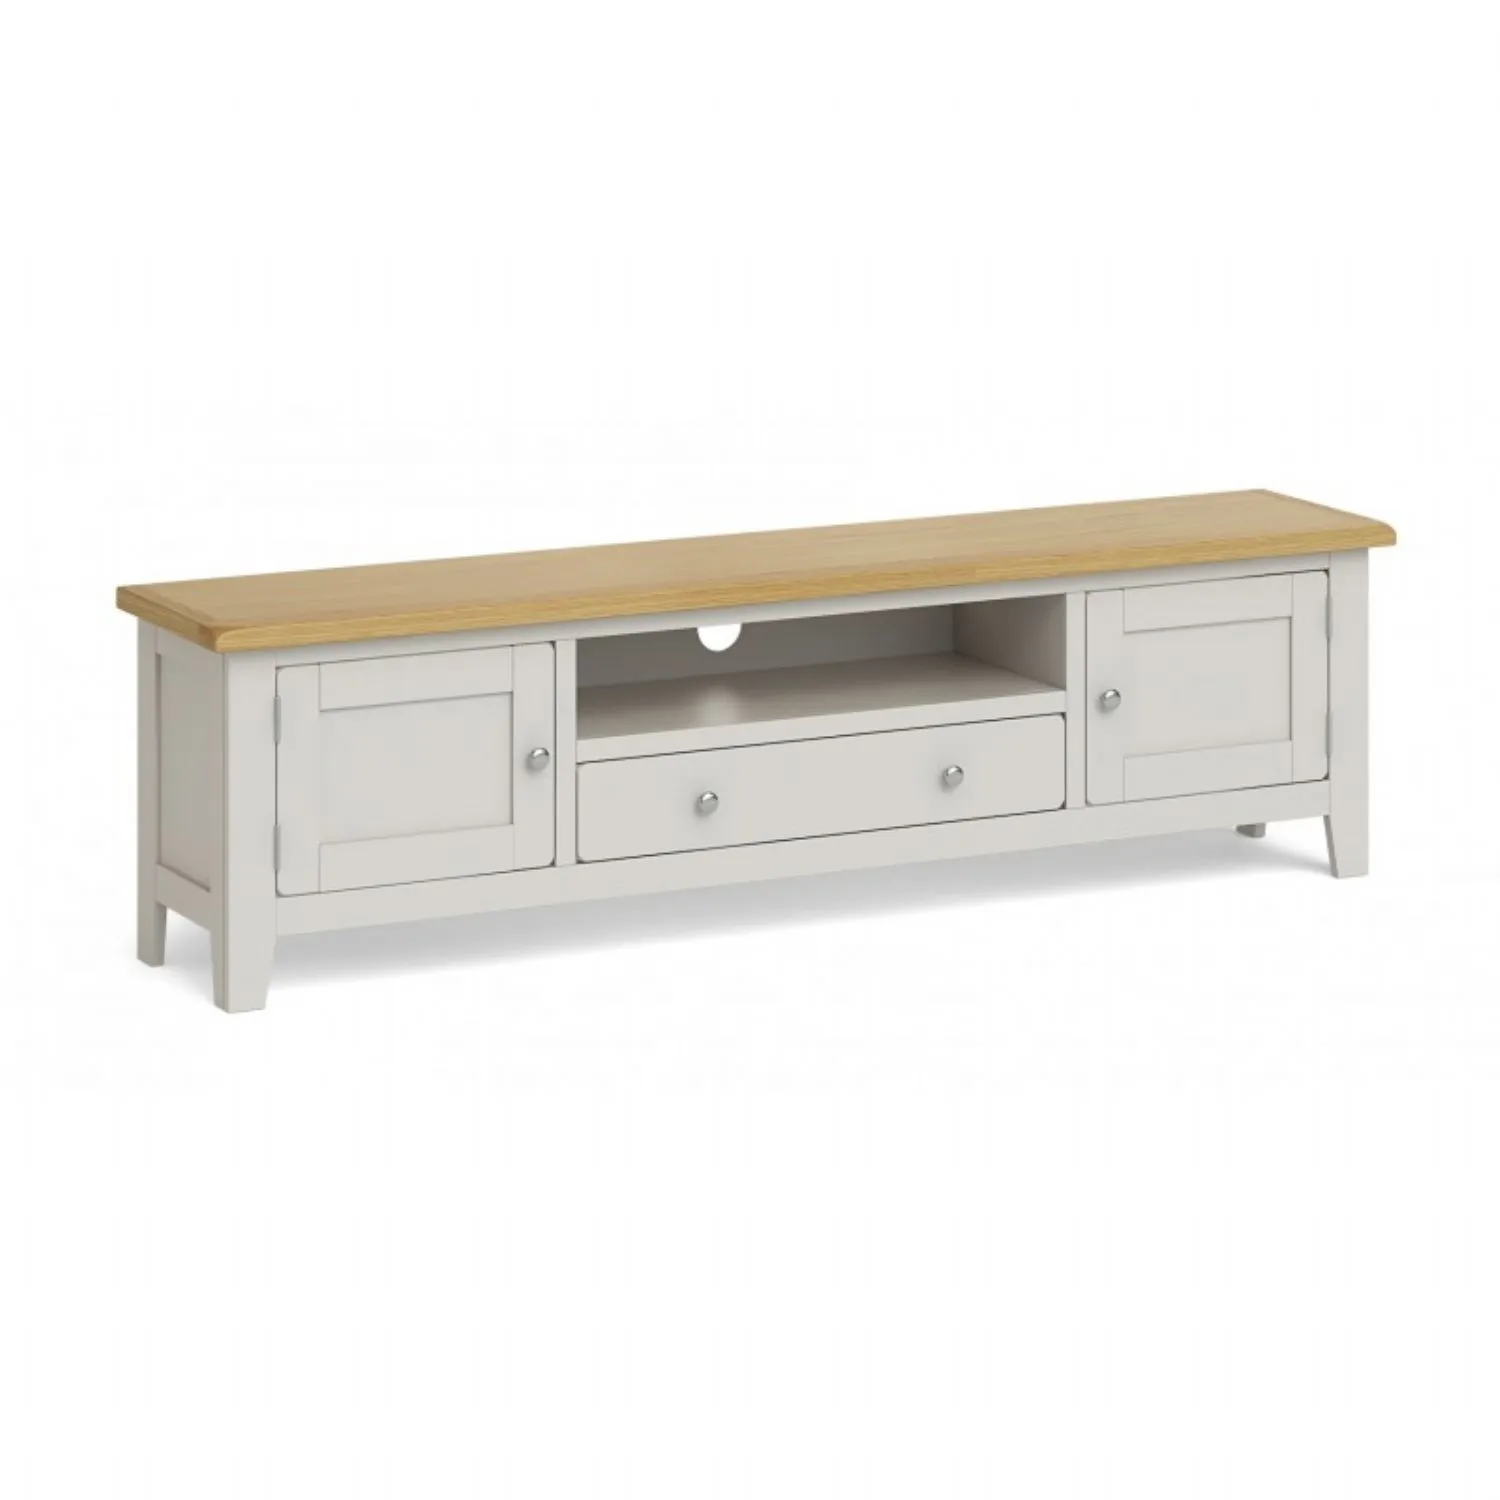 Solid Oak and Grey Painted 180cm Extra Long TV Cabinet